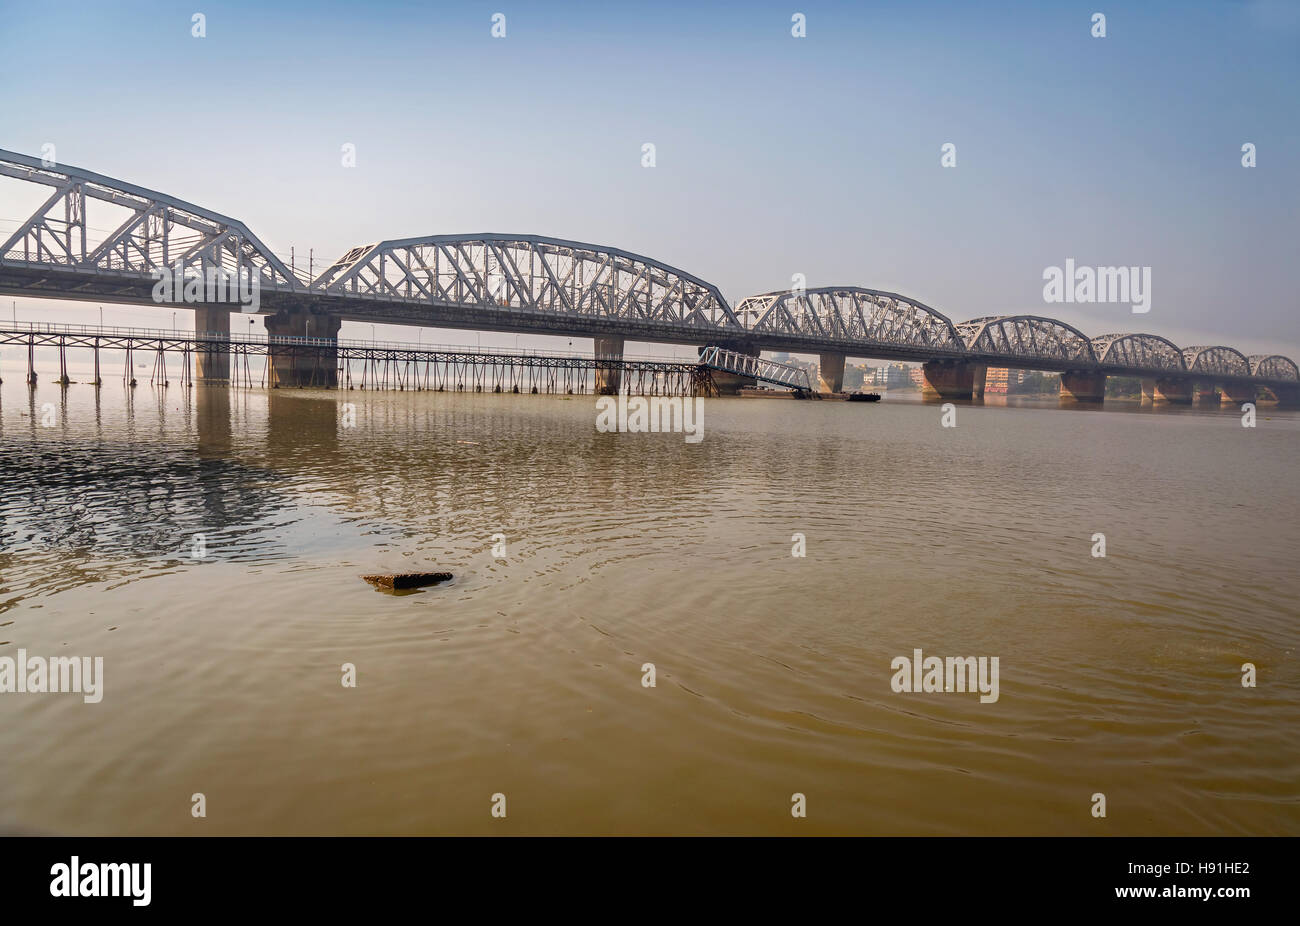 Bally bridge a multi span steel infrastructure over the river Ganges (Hooghly). Stock Photo